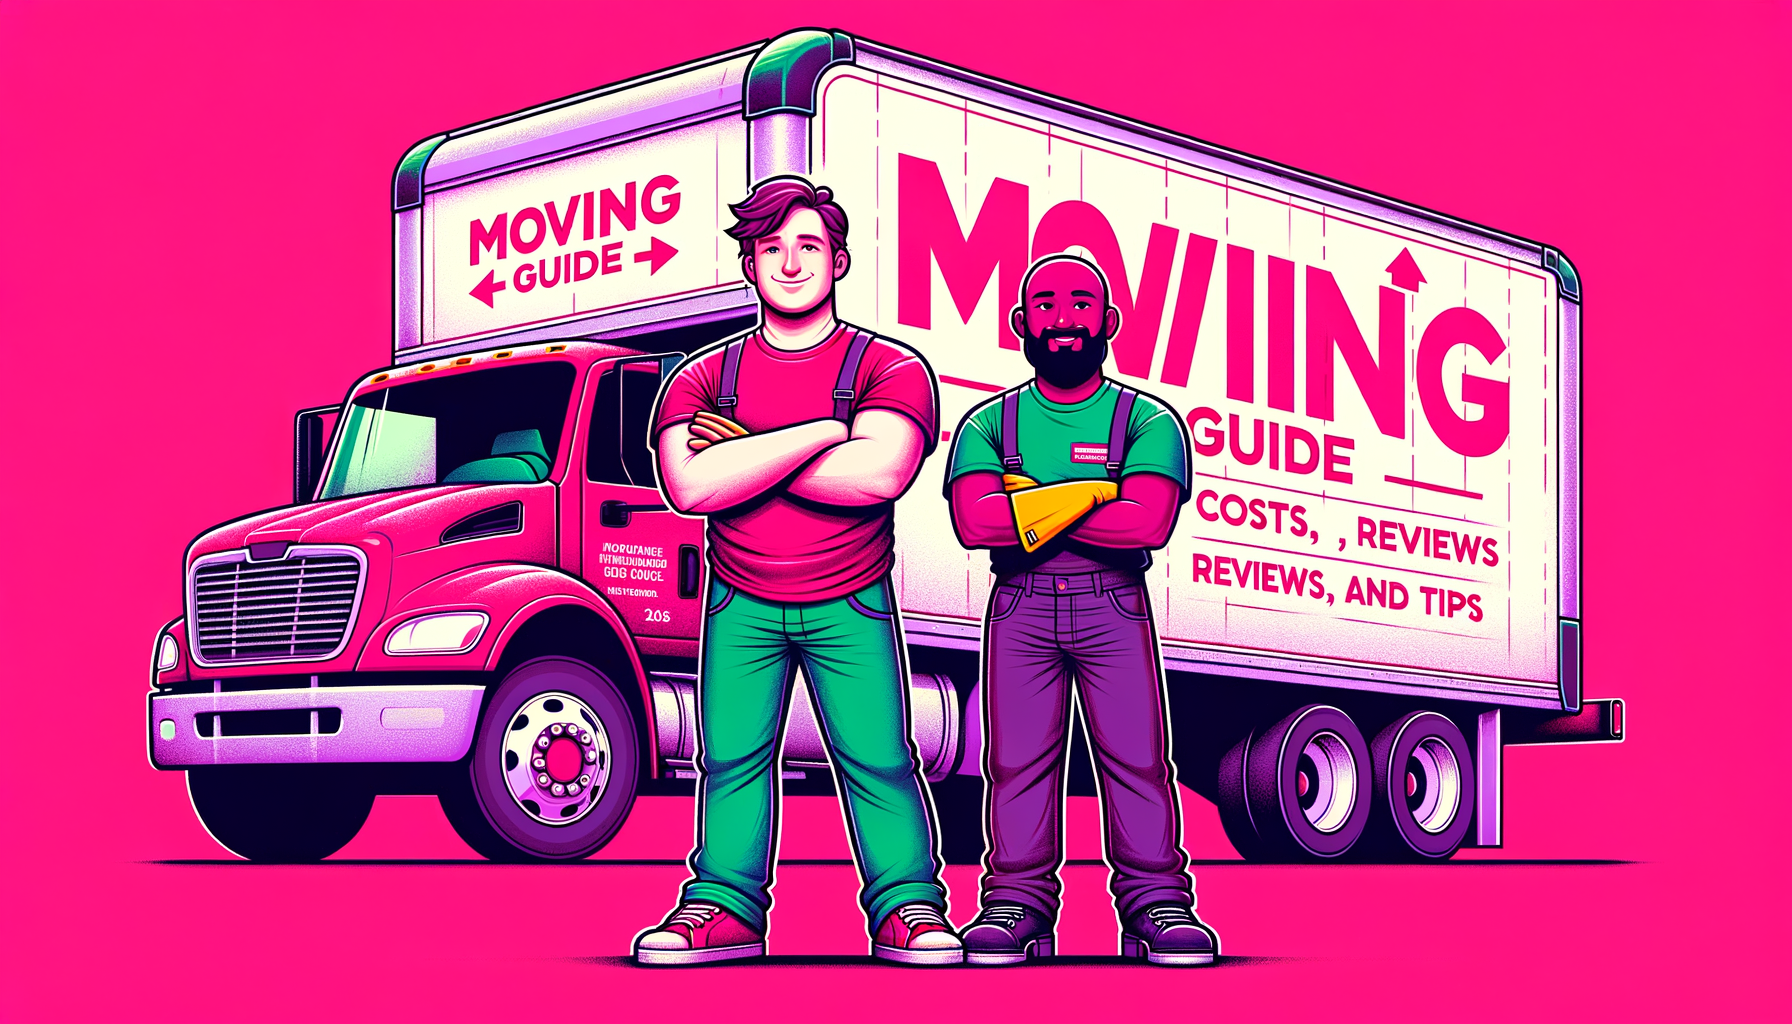 Cartoon illustration in fuschia tones featuring two men beside a moving truck, representing a guide on moving costs, reviews, and tips.